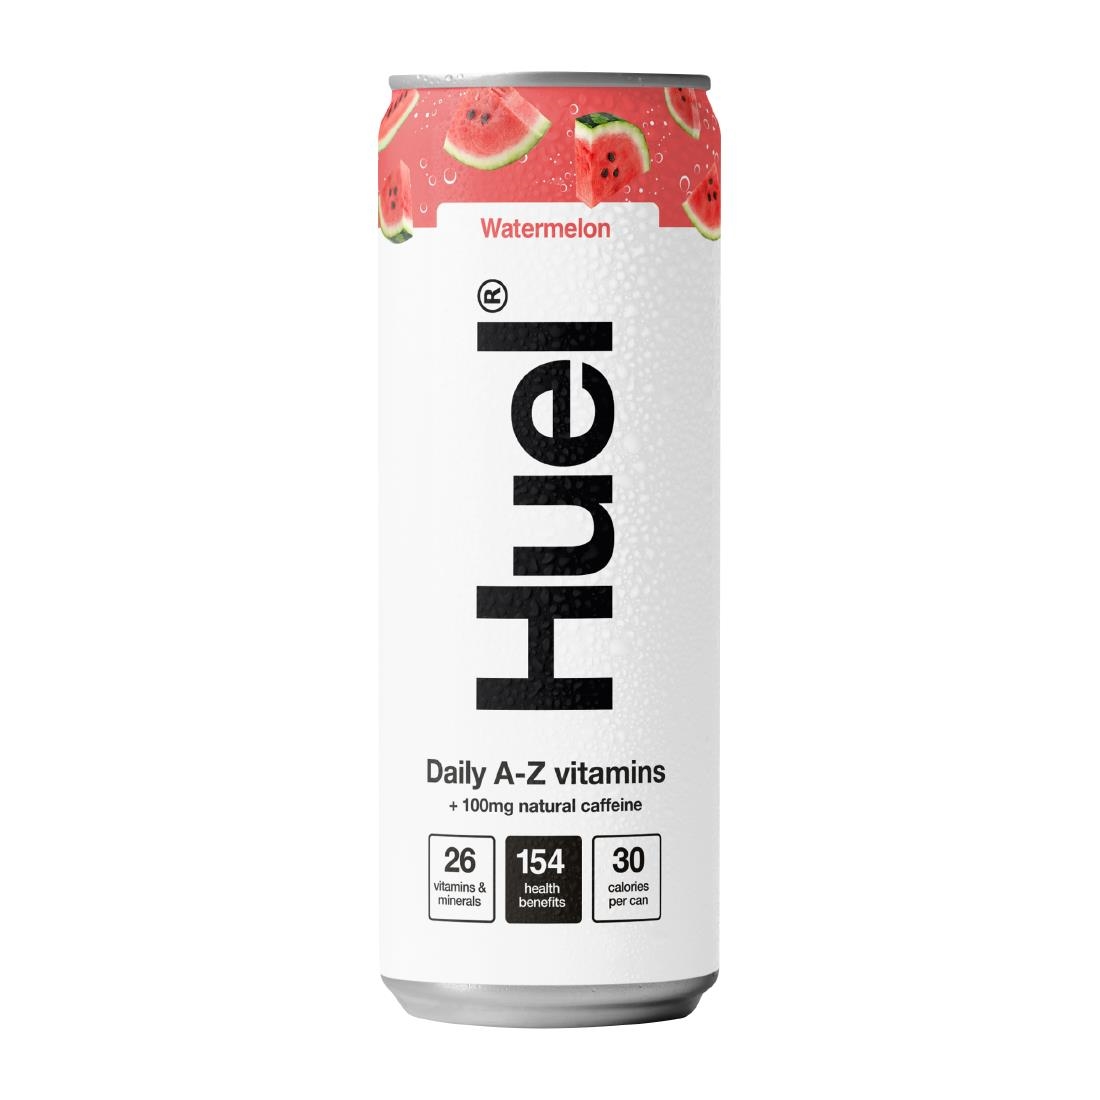 HUEL A-Z Vitamin Drink - Watermelon Pack of 12 (HS550)